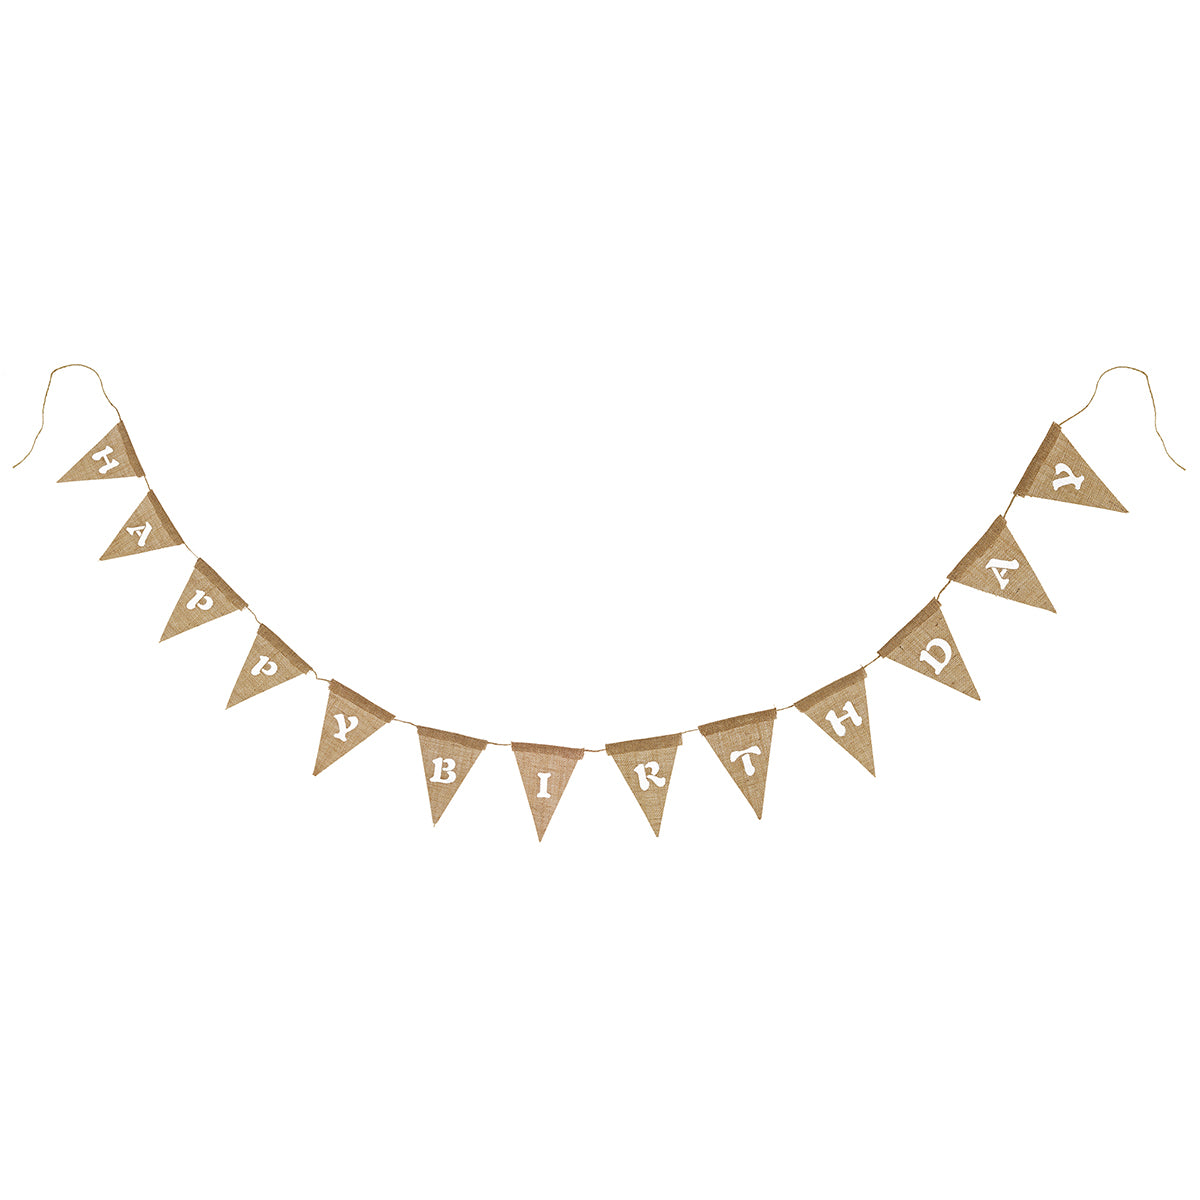 A ‘Happy Birthday’ Burlap Pennant Banner with a white background